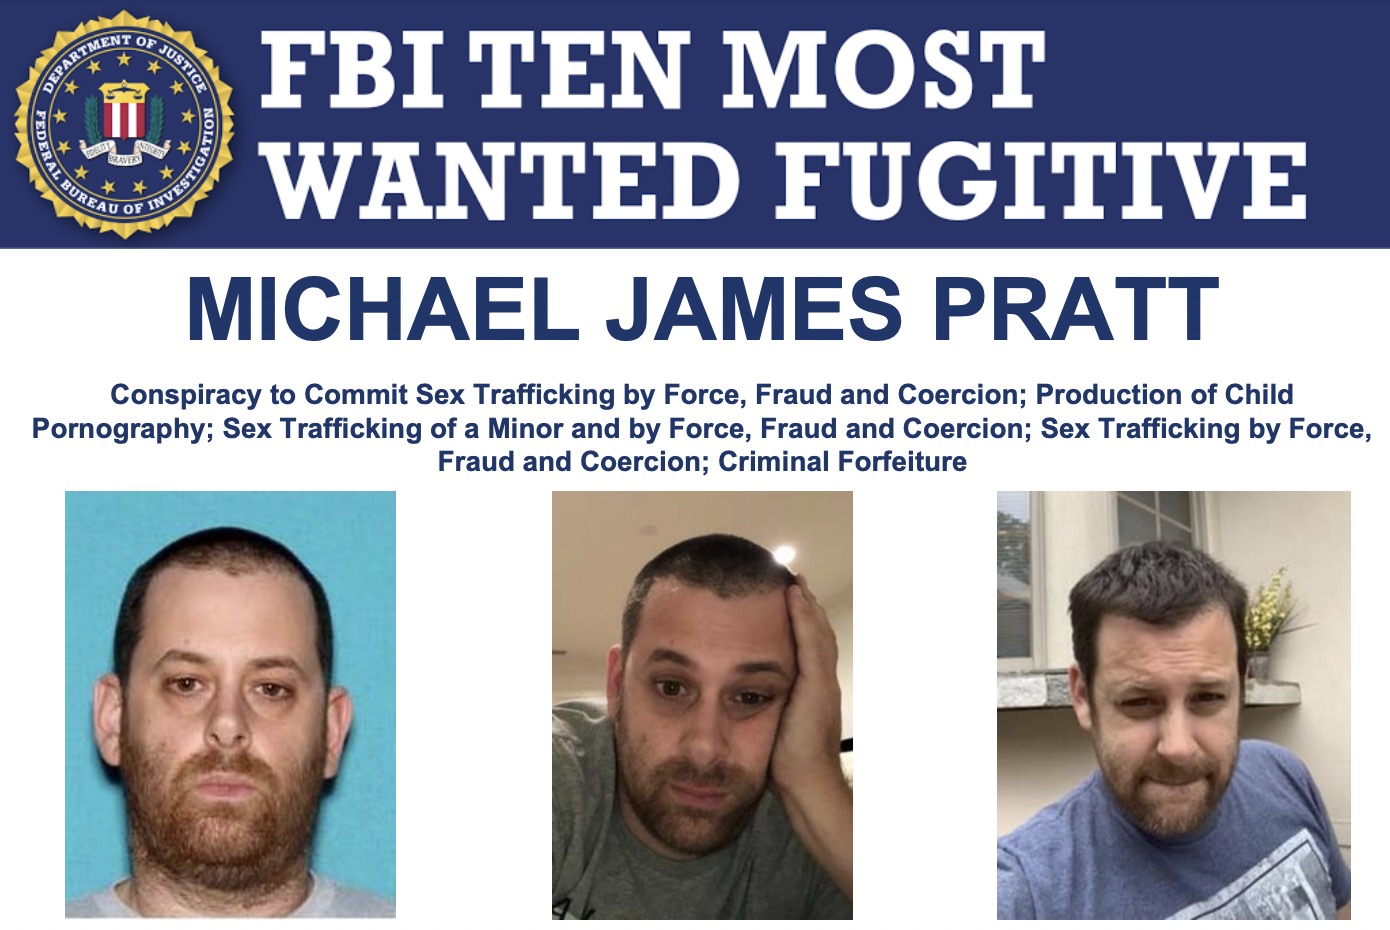 Xxx Hd 16 Yaer - GirlsDoPorn founder, on the run for 3 years, now on FBI's Ten Most Wanted  list | Ars Technica